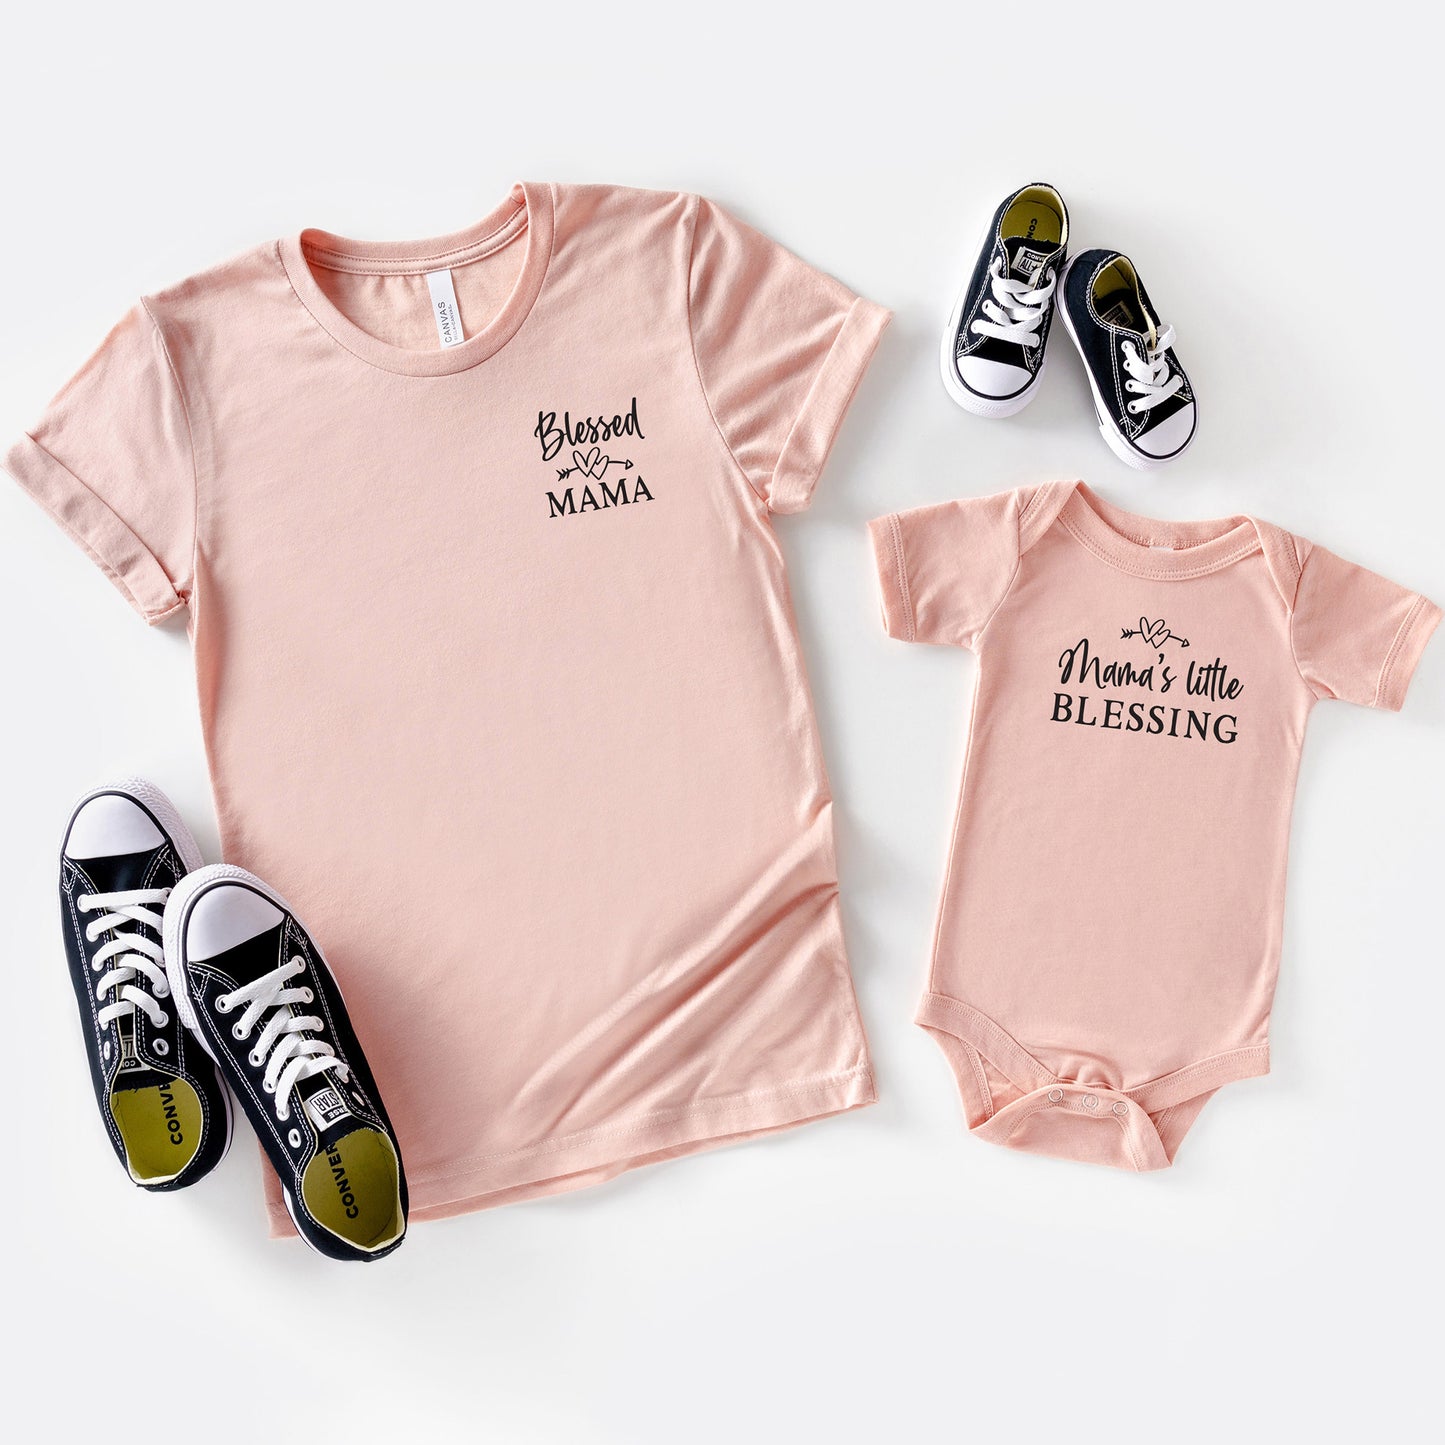 
                  
                    a blessed mama shirt in peach, shown with a matching baby onesie
                  
                